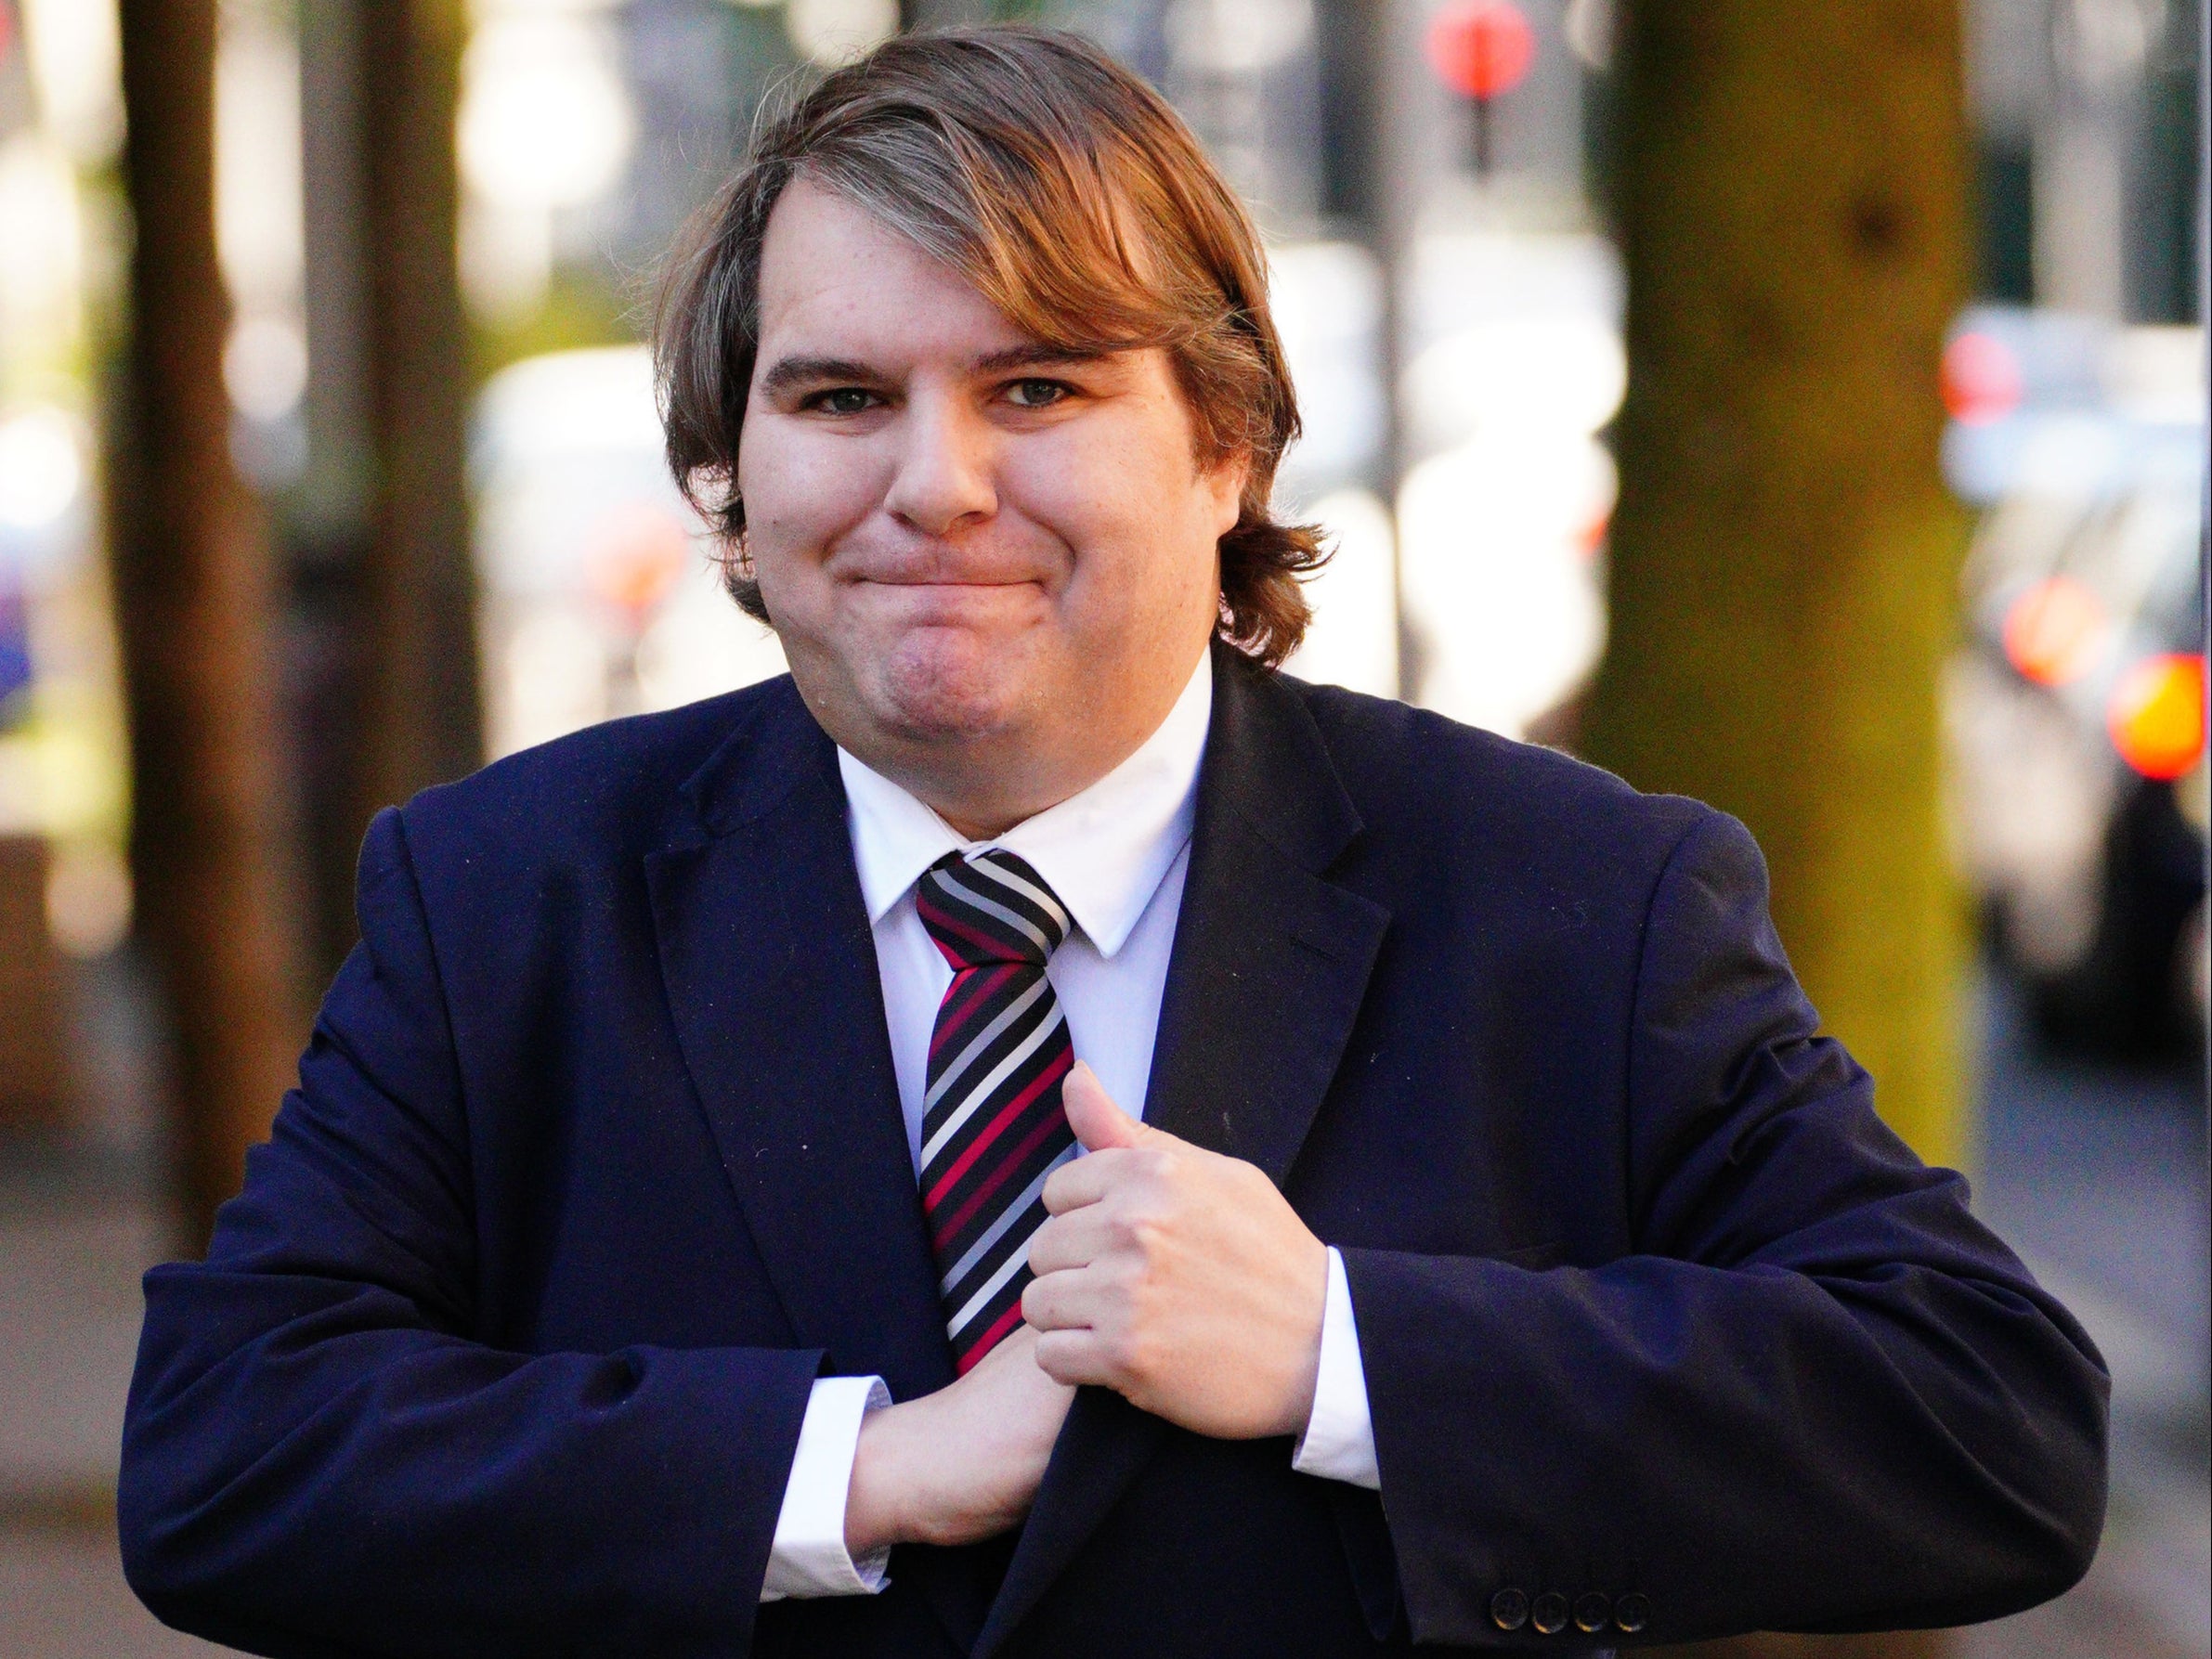 Jamie Wallis became the first MP in the UK to come out as transgender earlier this year